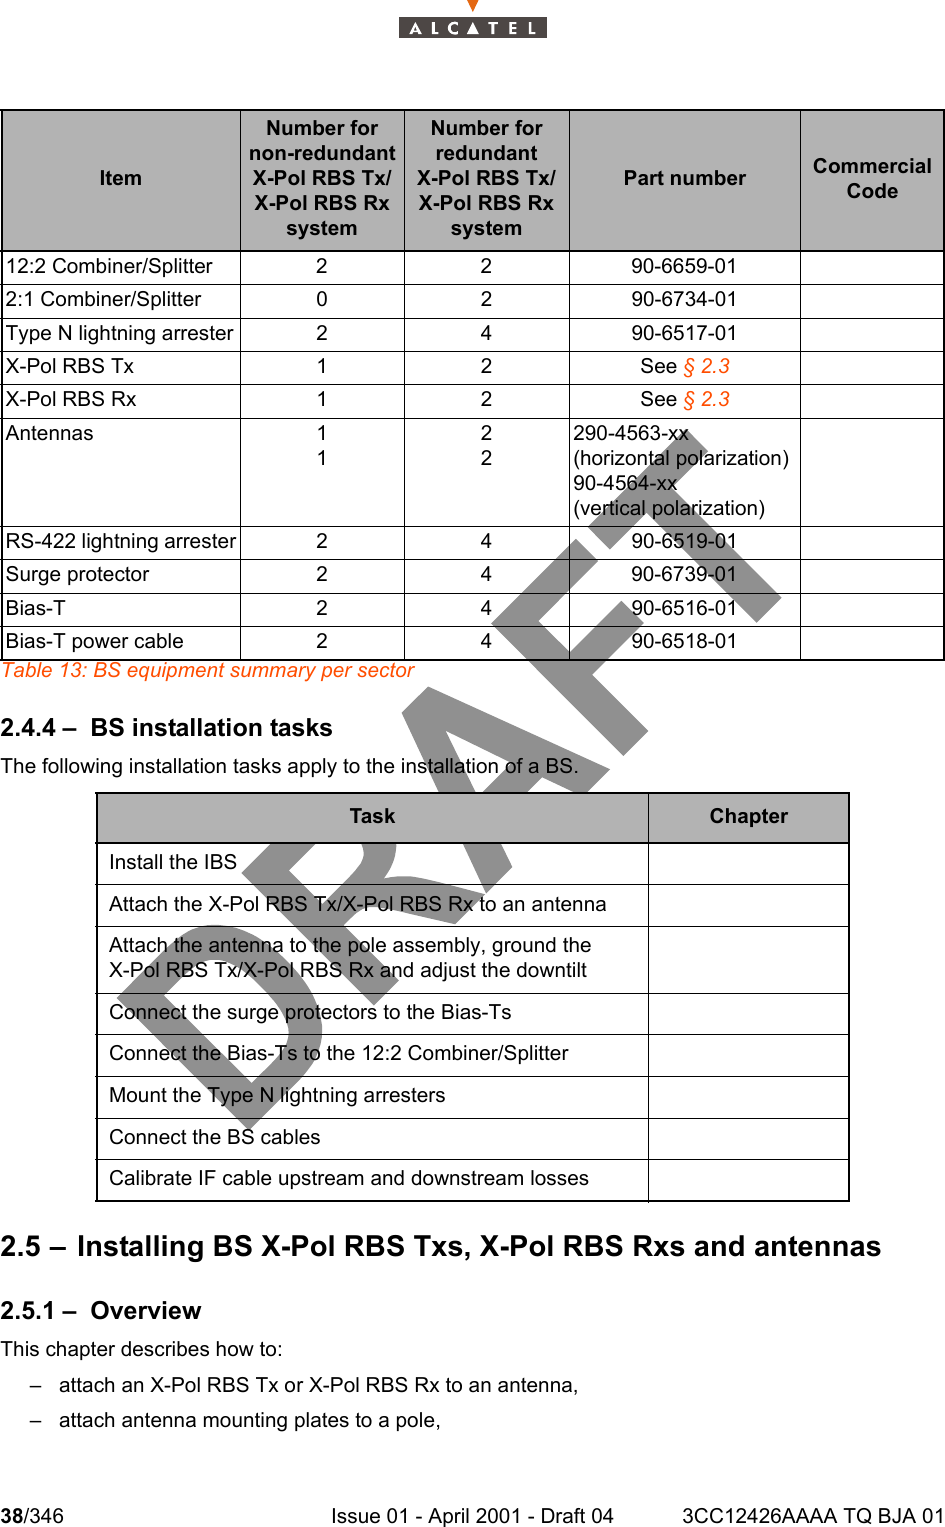 38/346 Issue 01 - April 2001 - Draft 04 3CC12426AAAA TQ BJA 01104Table 13: BS equipment summary per sector2.4.4 – BS installation tasksThe following installation tasks apply to the installation of a BS.2.5 – Installing BS X-Pol RBS Txs, X-Pol RBS Rxs and antennas2.5.1 – OverviewThis chapter describes how to: – attach an X-Pol RBS Tx or X-Pol RBS Rx to an antenna,– attach antenna mounting plates to a pole,ItemNumber for non-redundant X-Pol RBS Tx/X-Pol RBS Rx systemNumber for redundantX-Pol RBS Tx/X-Pol RBS Rx systemPart number Commercial Code12:2 Combiner/Splitter 2 2 90-6659-012:1 Combiner/Splitter 0 2 90-6734-01Type N lightning arrester 2 4 90-6517-01X-Pol RBS Tx 1 2 See § 2.3X-Pol RBS Rx 1 2 See § 2.3Antennas 1122290-4563-xx(horizontal polarization)90-4564-xx(vertical polarization)RS-422 lightning arrester 2 4 90-6519-01Surge protector 2 4 90-6739-01Bias-T 2 4 90-6516-01Bias-T power cable 2 4 90-6518-01Task ChapterInstall the IBSAttach the X-Pol RBS Tx/X-Pol RBS Rx to an antennaAttach the antenna to the pole assembly, ground theX-Pol RBS Tx/X-Pol RBS Rx and adjust the downtiltConnect the surge protectors to the Bias-TsConnect the Bias-Ts to the 12:2 Combiner/SplitterMount the Type N lightning arrestersConnect the BS cablesCalibrate IF cable upstream and downstream losses